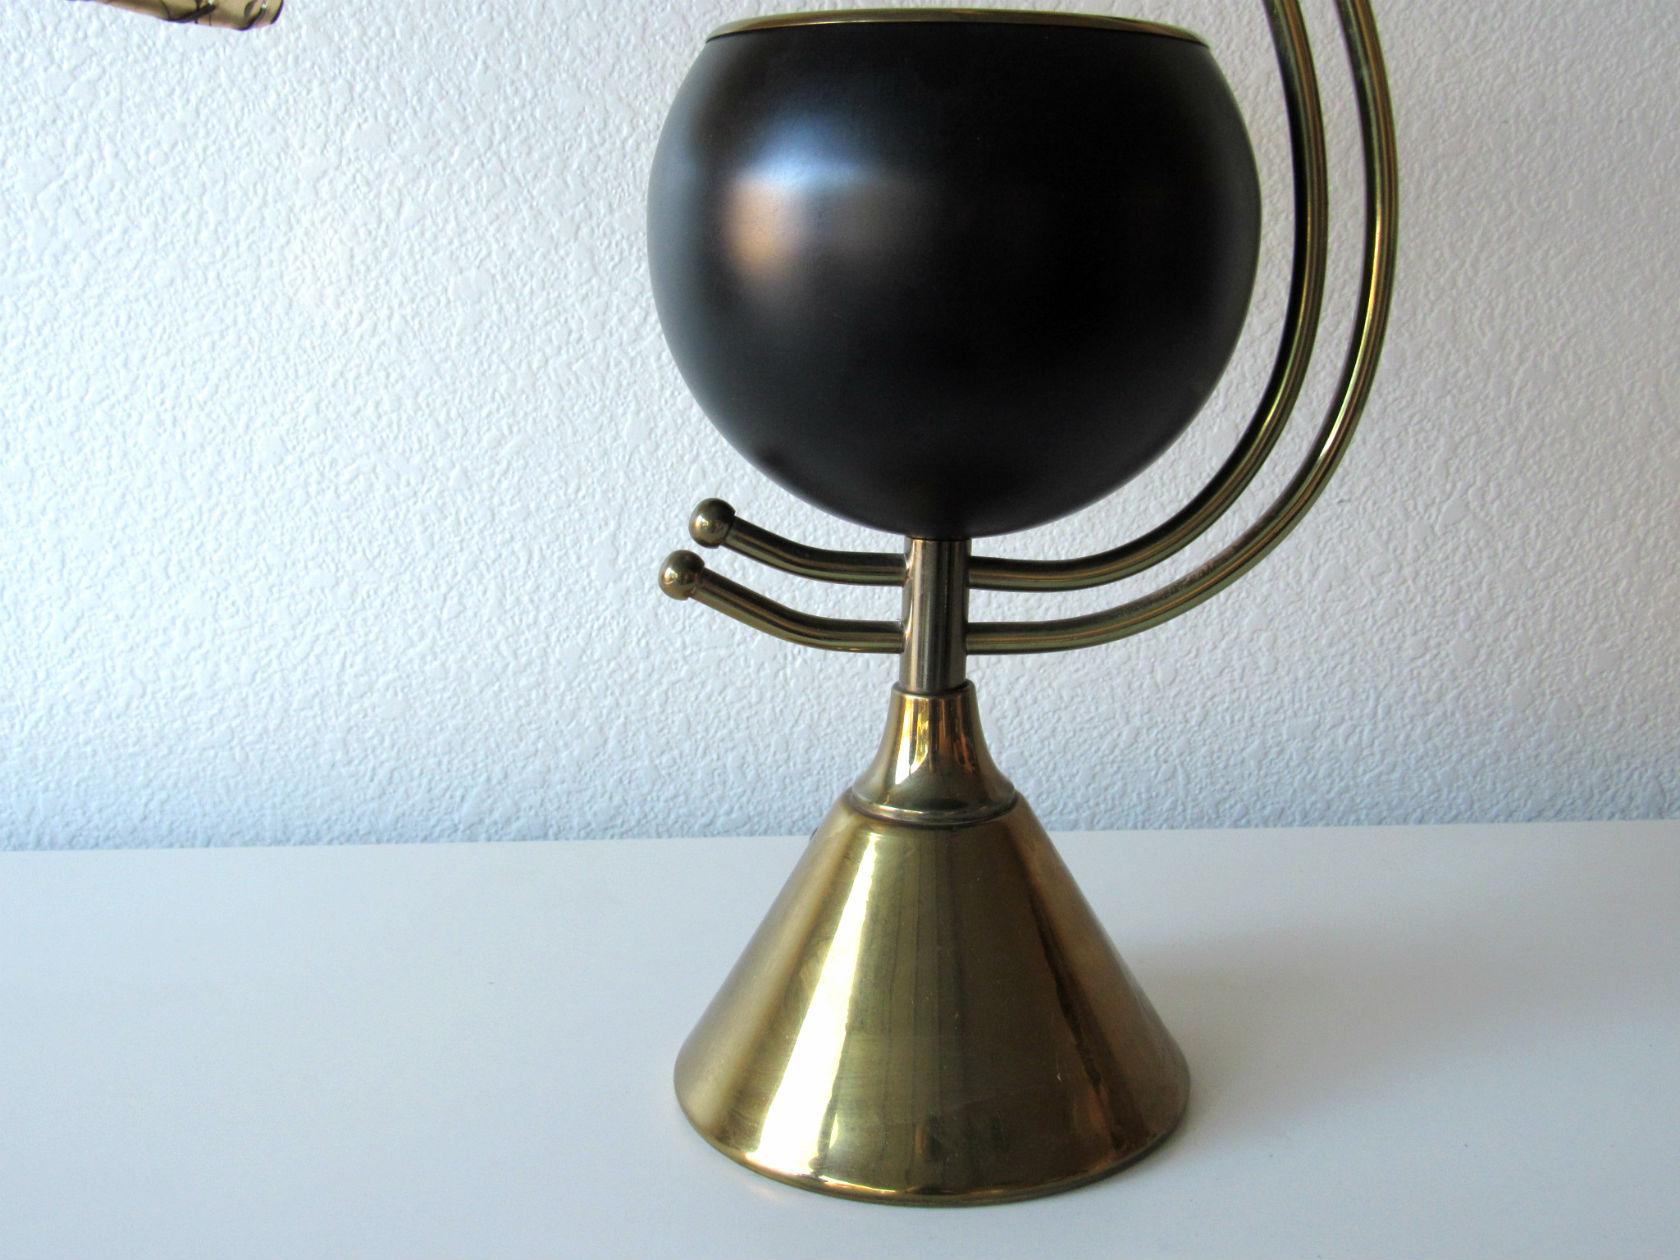 Atomic Age Adjustable Mid-Century Modern Majestic Lamp 1950s For Sale 2